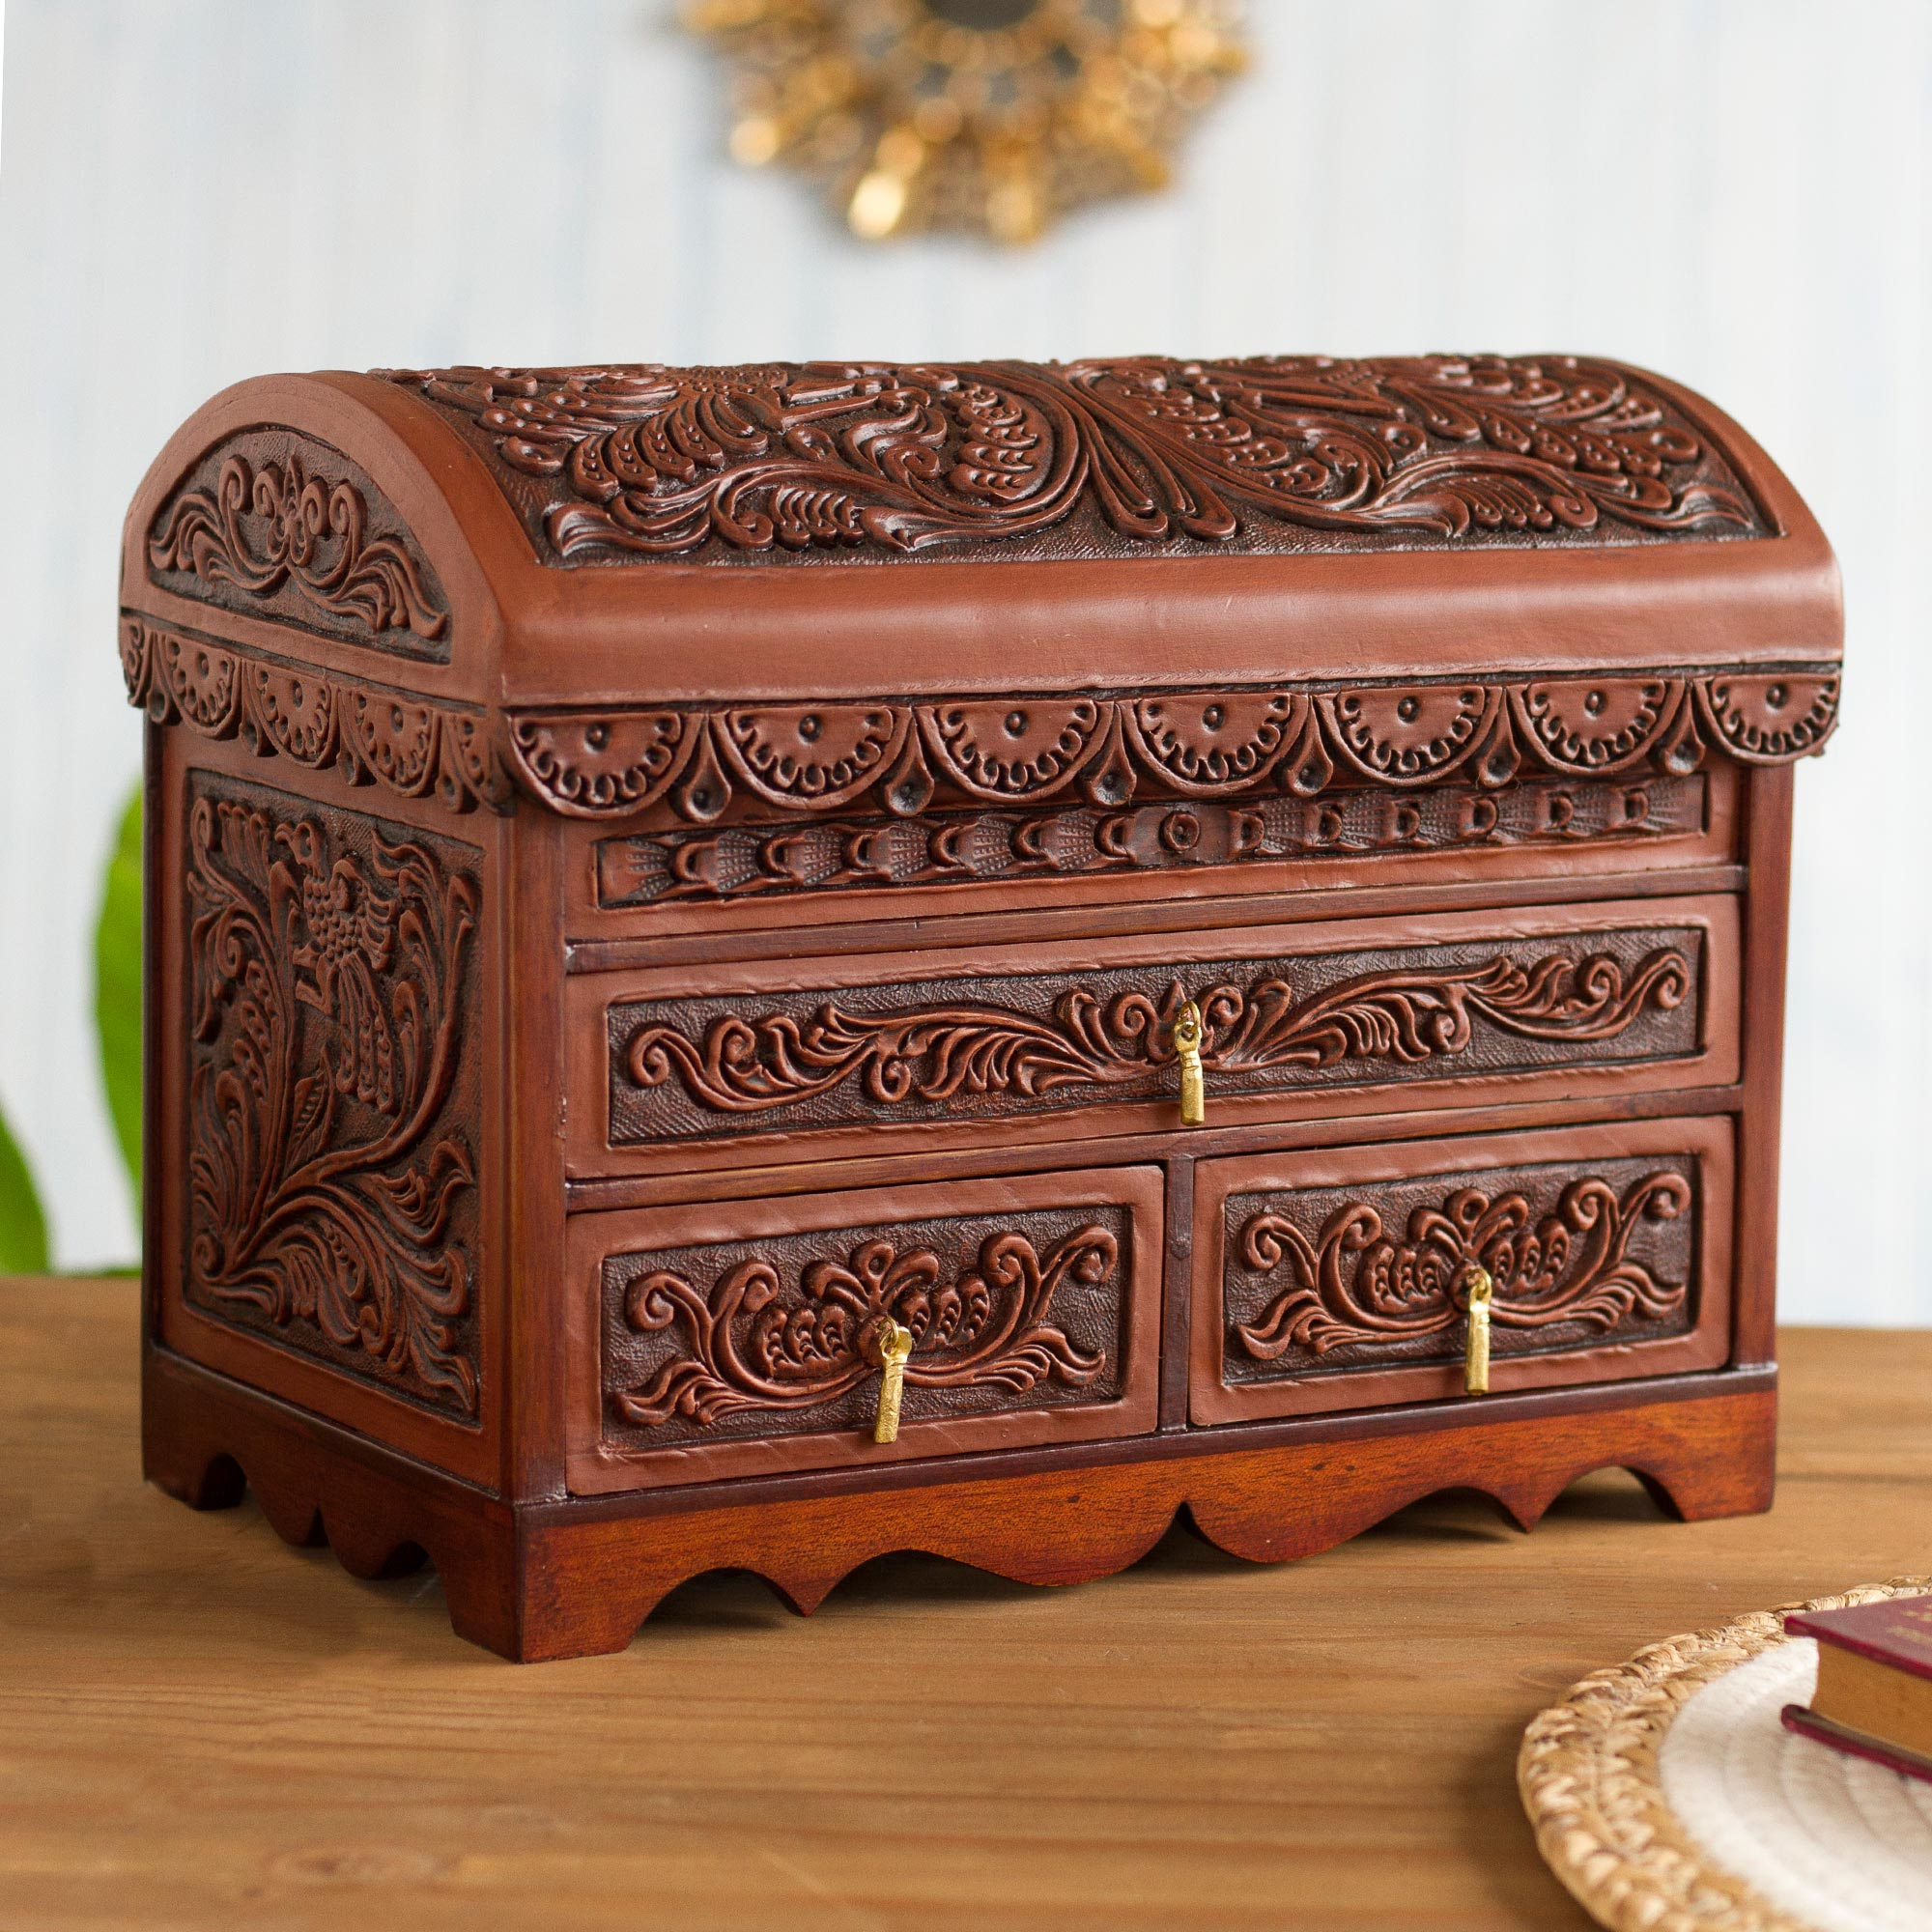 Handcrafted Wood and Leather Jewellery Box from Peru - Novica